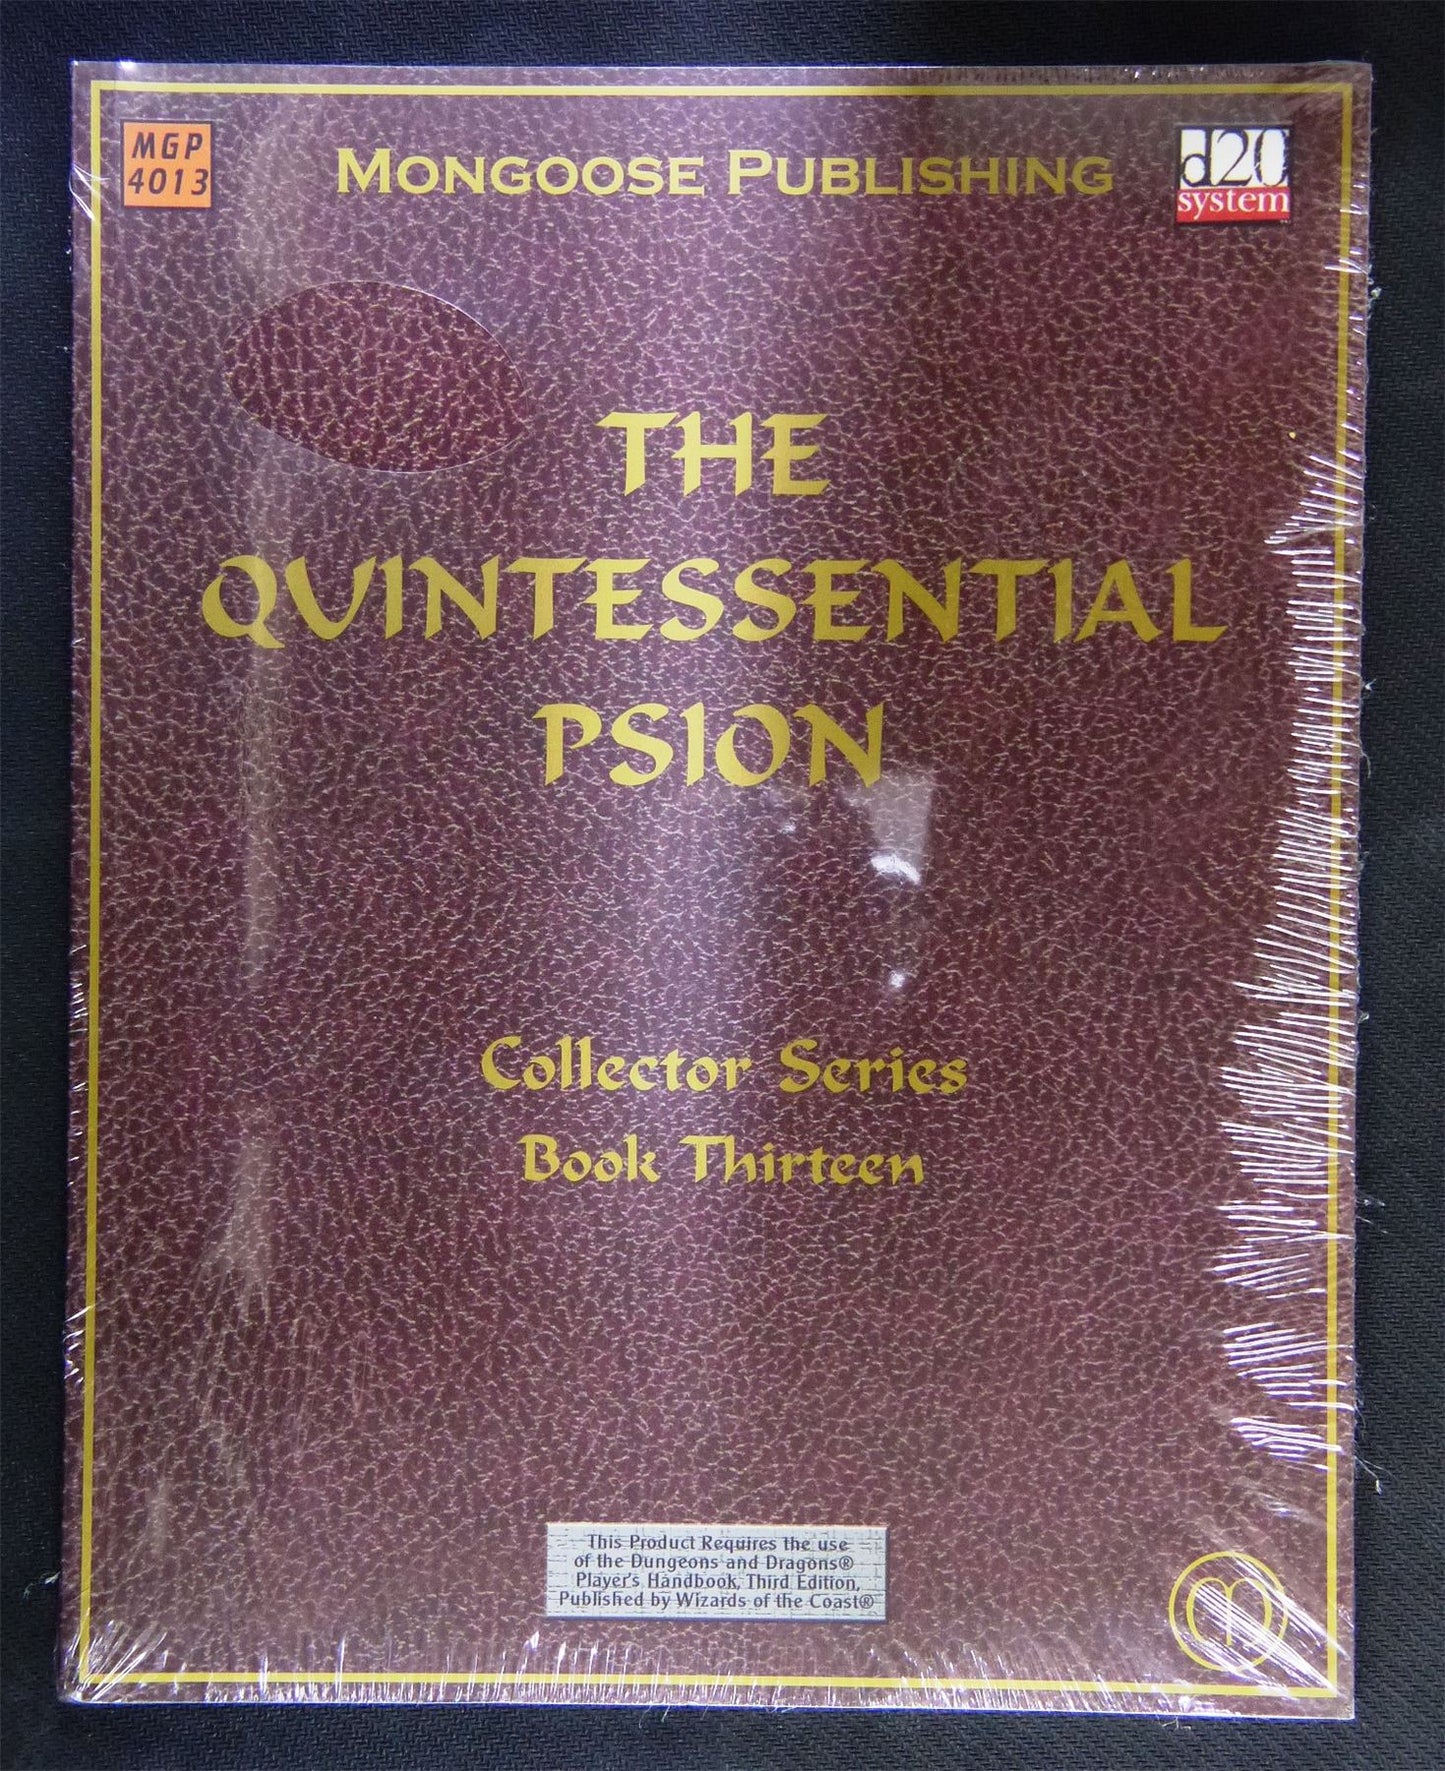 The Quintessential Psion - Collector Series Book Thirteen - D20 System - Roleplay - RPG #15Q